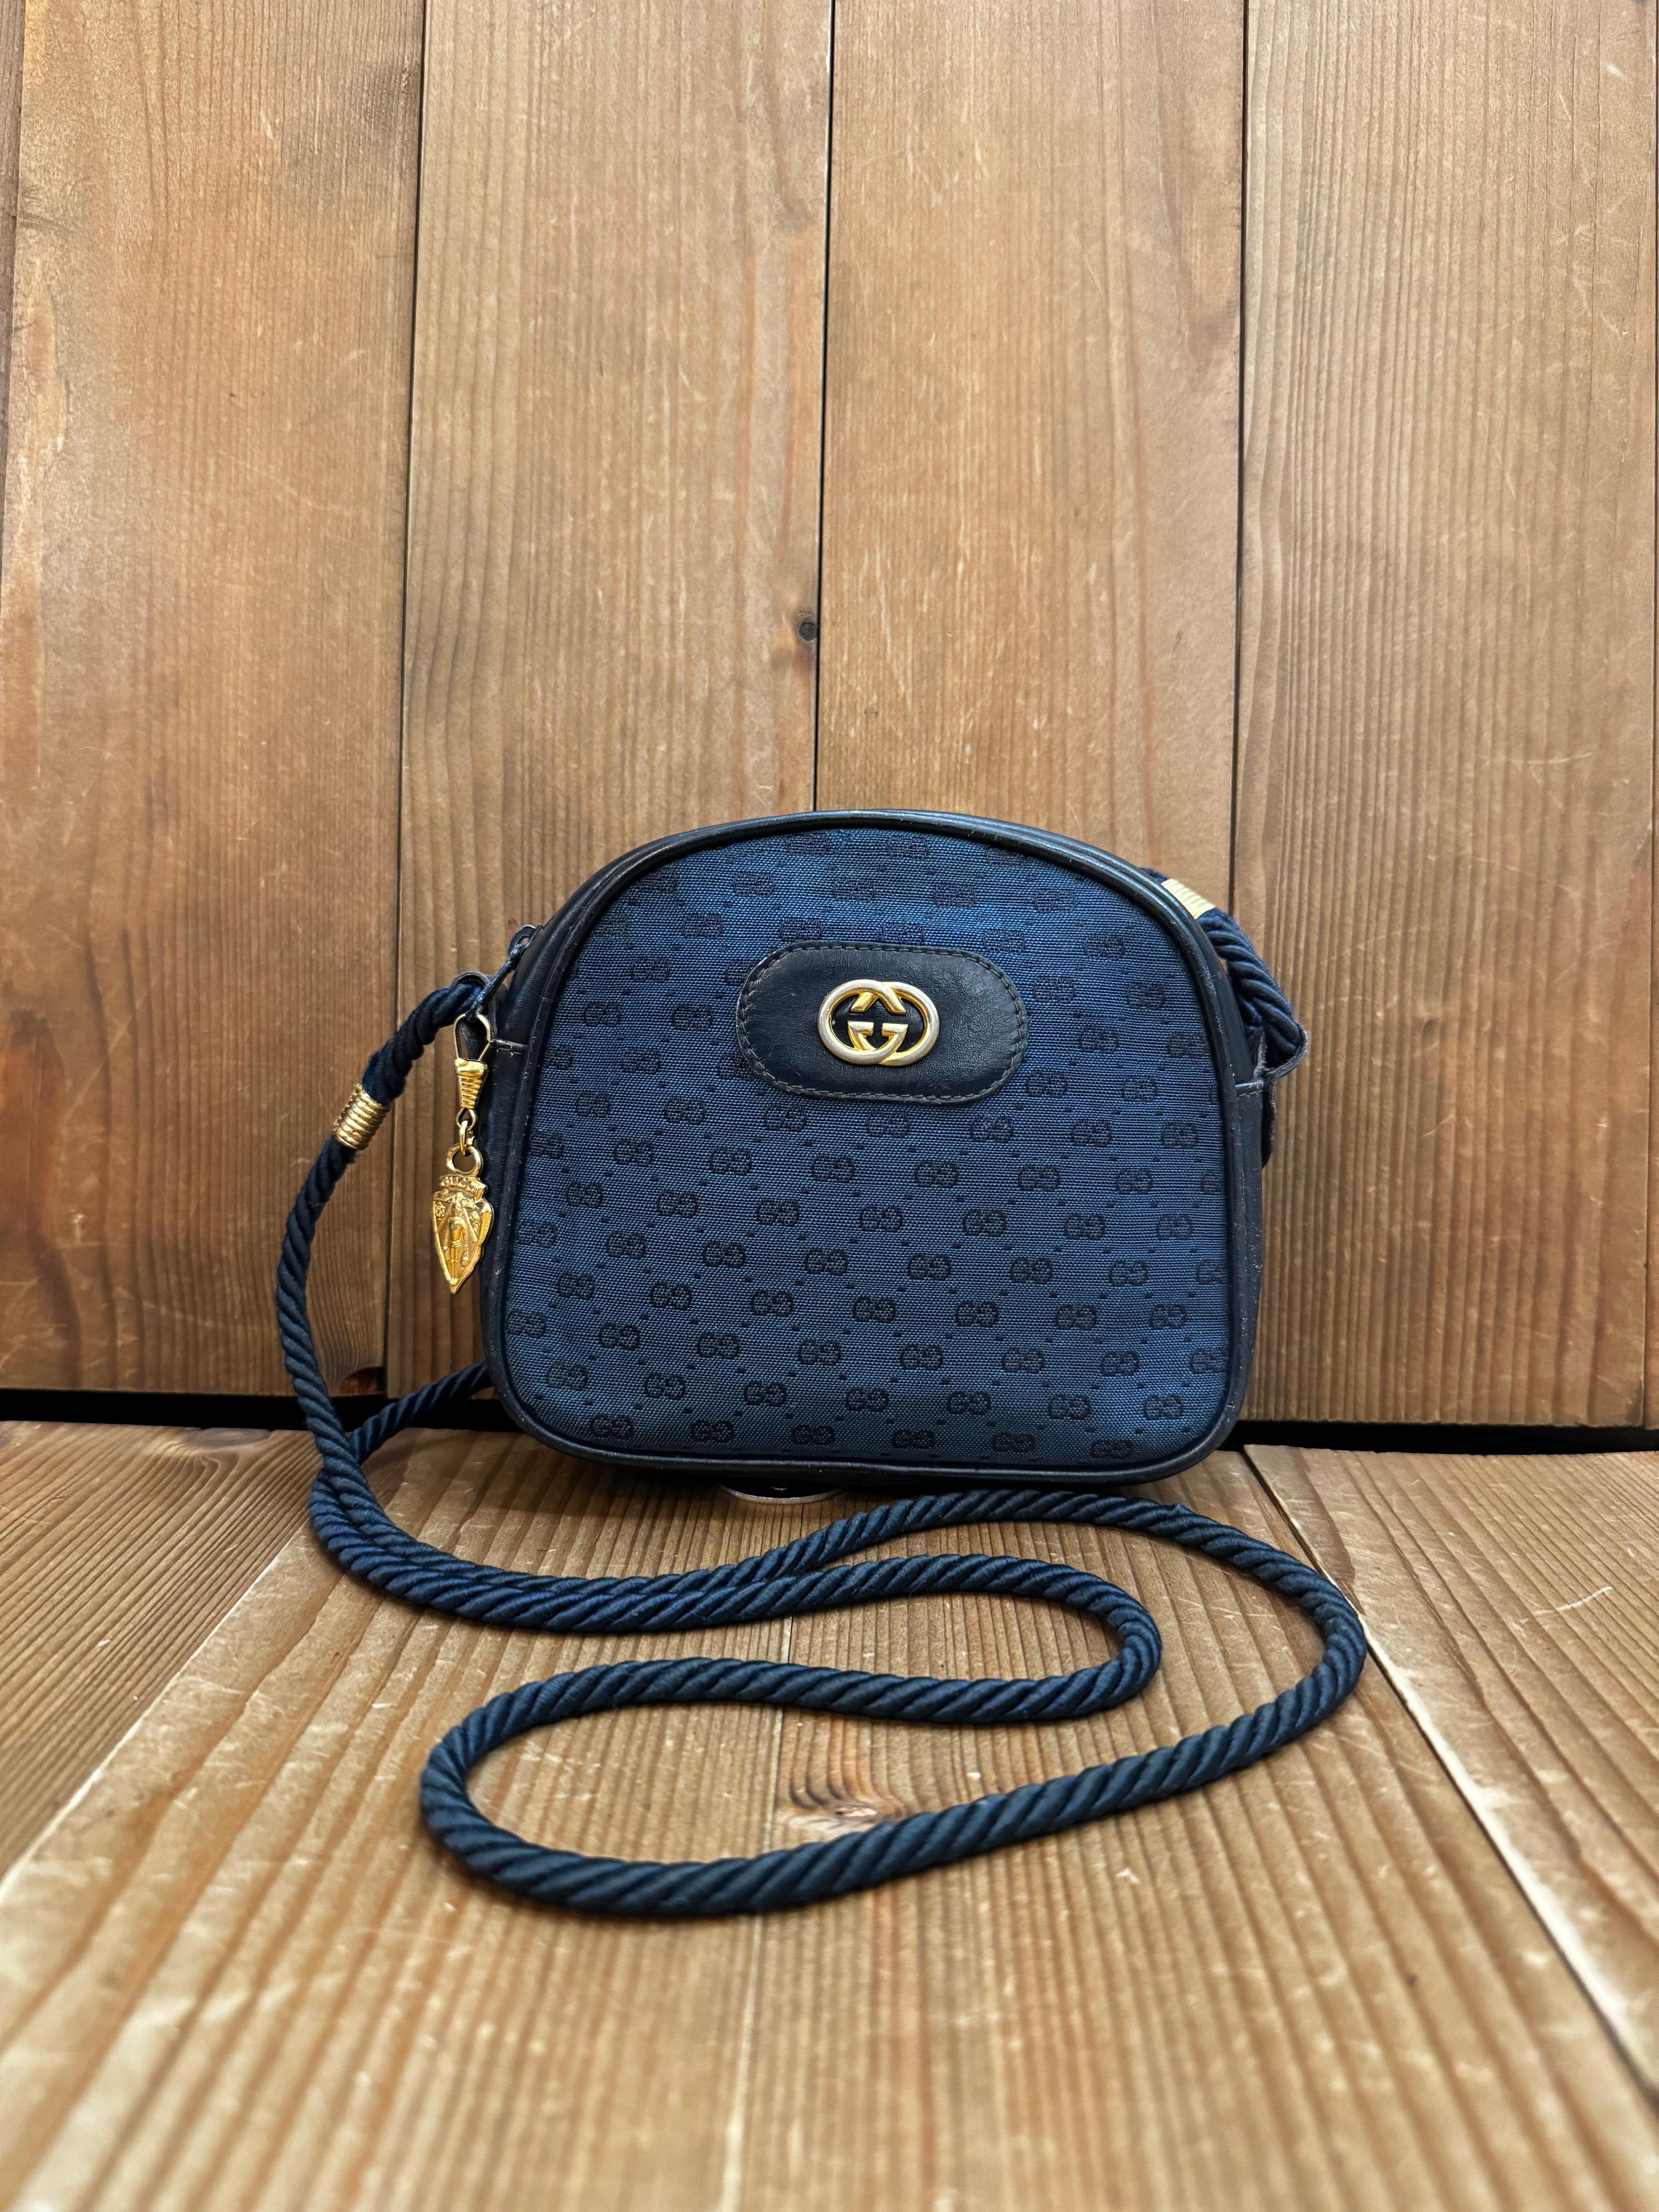 This vintage GUCCI micro crossbody bag is crafted of micro CC jacquard in navy featuring gold toned hardware and a rope strap. Top zipper closure opens to a leather interior in black. Made in Italy. Measures approximately 5.75 x 5 x 1.5 inches Strap